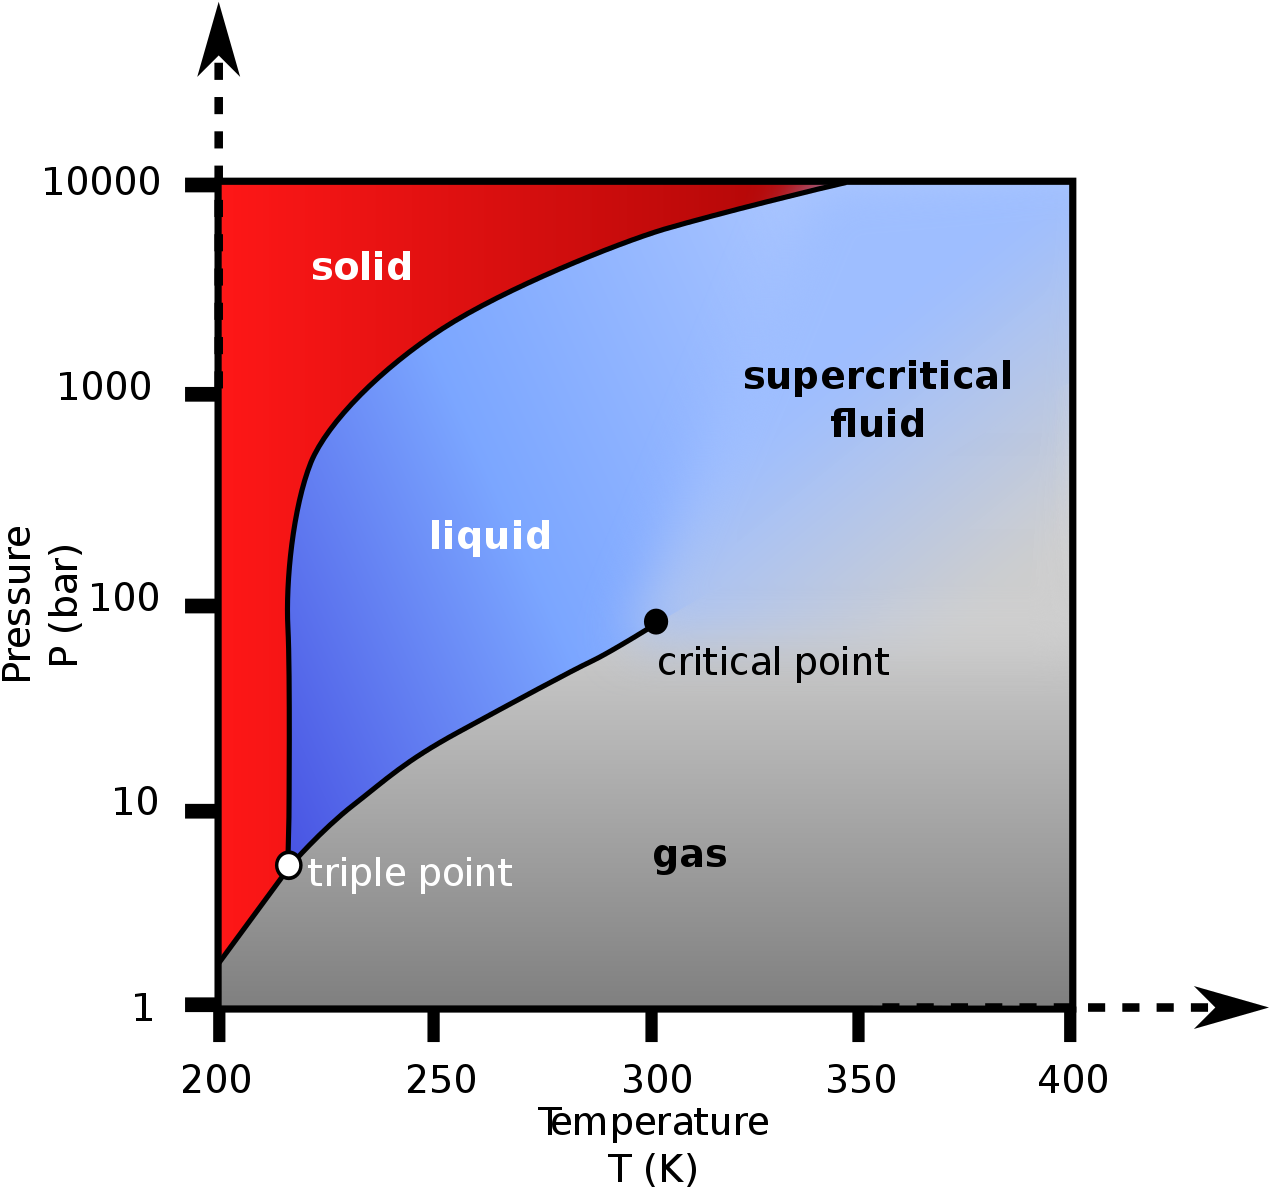 A graph is shown where the x-axis is labeled “Temperature (K )” and has values of 200 to 400 in increments of 50 and the y-axis is labeled “Pressure (bar)” and has values of 1 to 10,000. A line extends from the lower left bottom of the graph upward to a point around “300, 90,” where it ends and is labeled “critical point”. The space under this curve is labeled “Gas.” A second line extends in a curve from point around “216, 5” to “350, 10,000.” The area to the left of this line and above the first line is labeled “Solid” while the area to the right is labeled “Liquid.” A section on the graph under the second line and past the point “301” on the x-axis is labeled “supercritical fluid.”